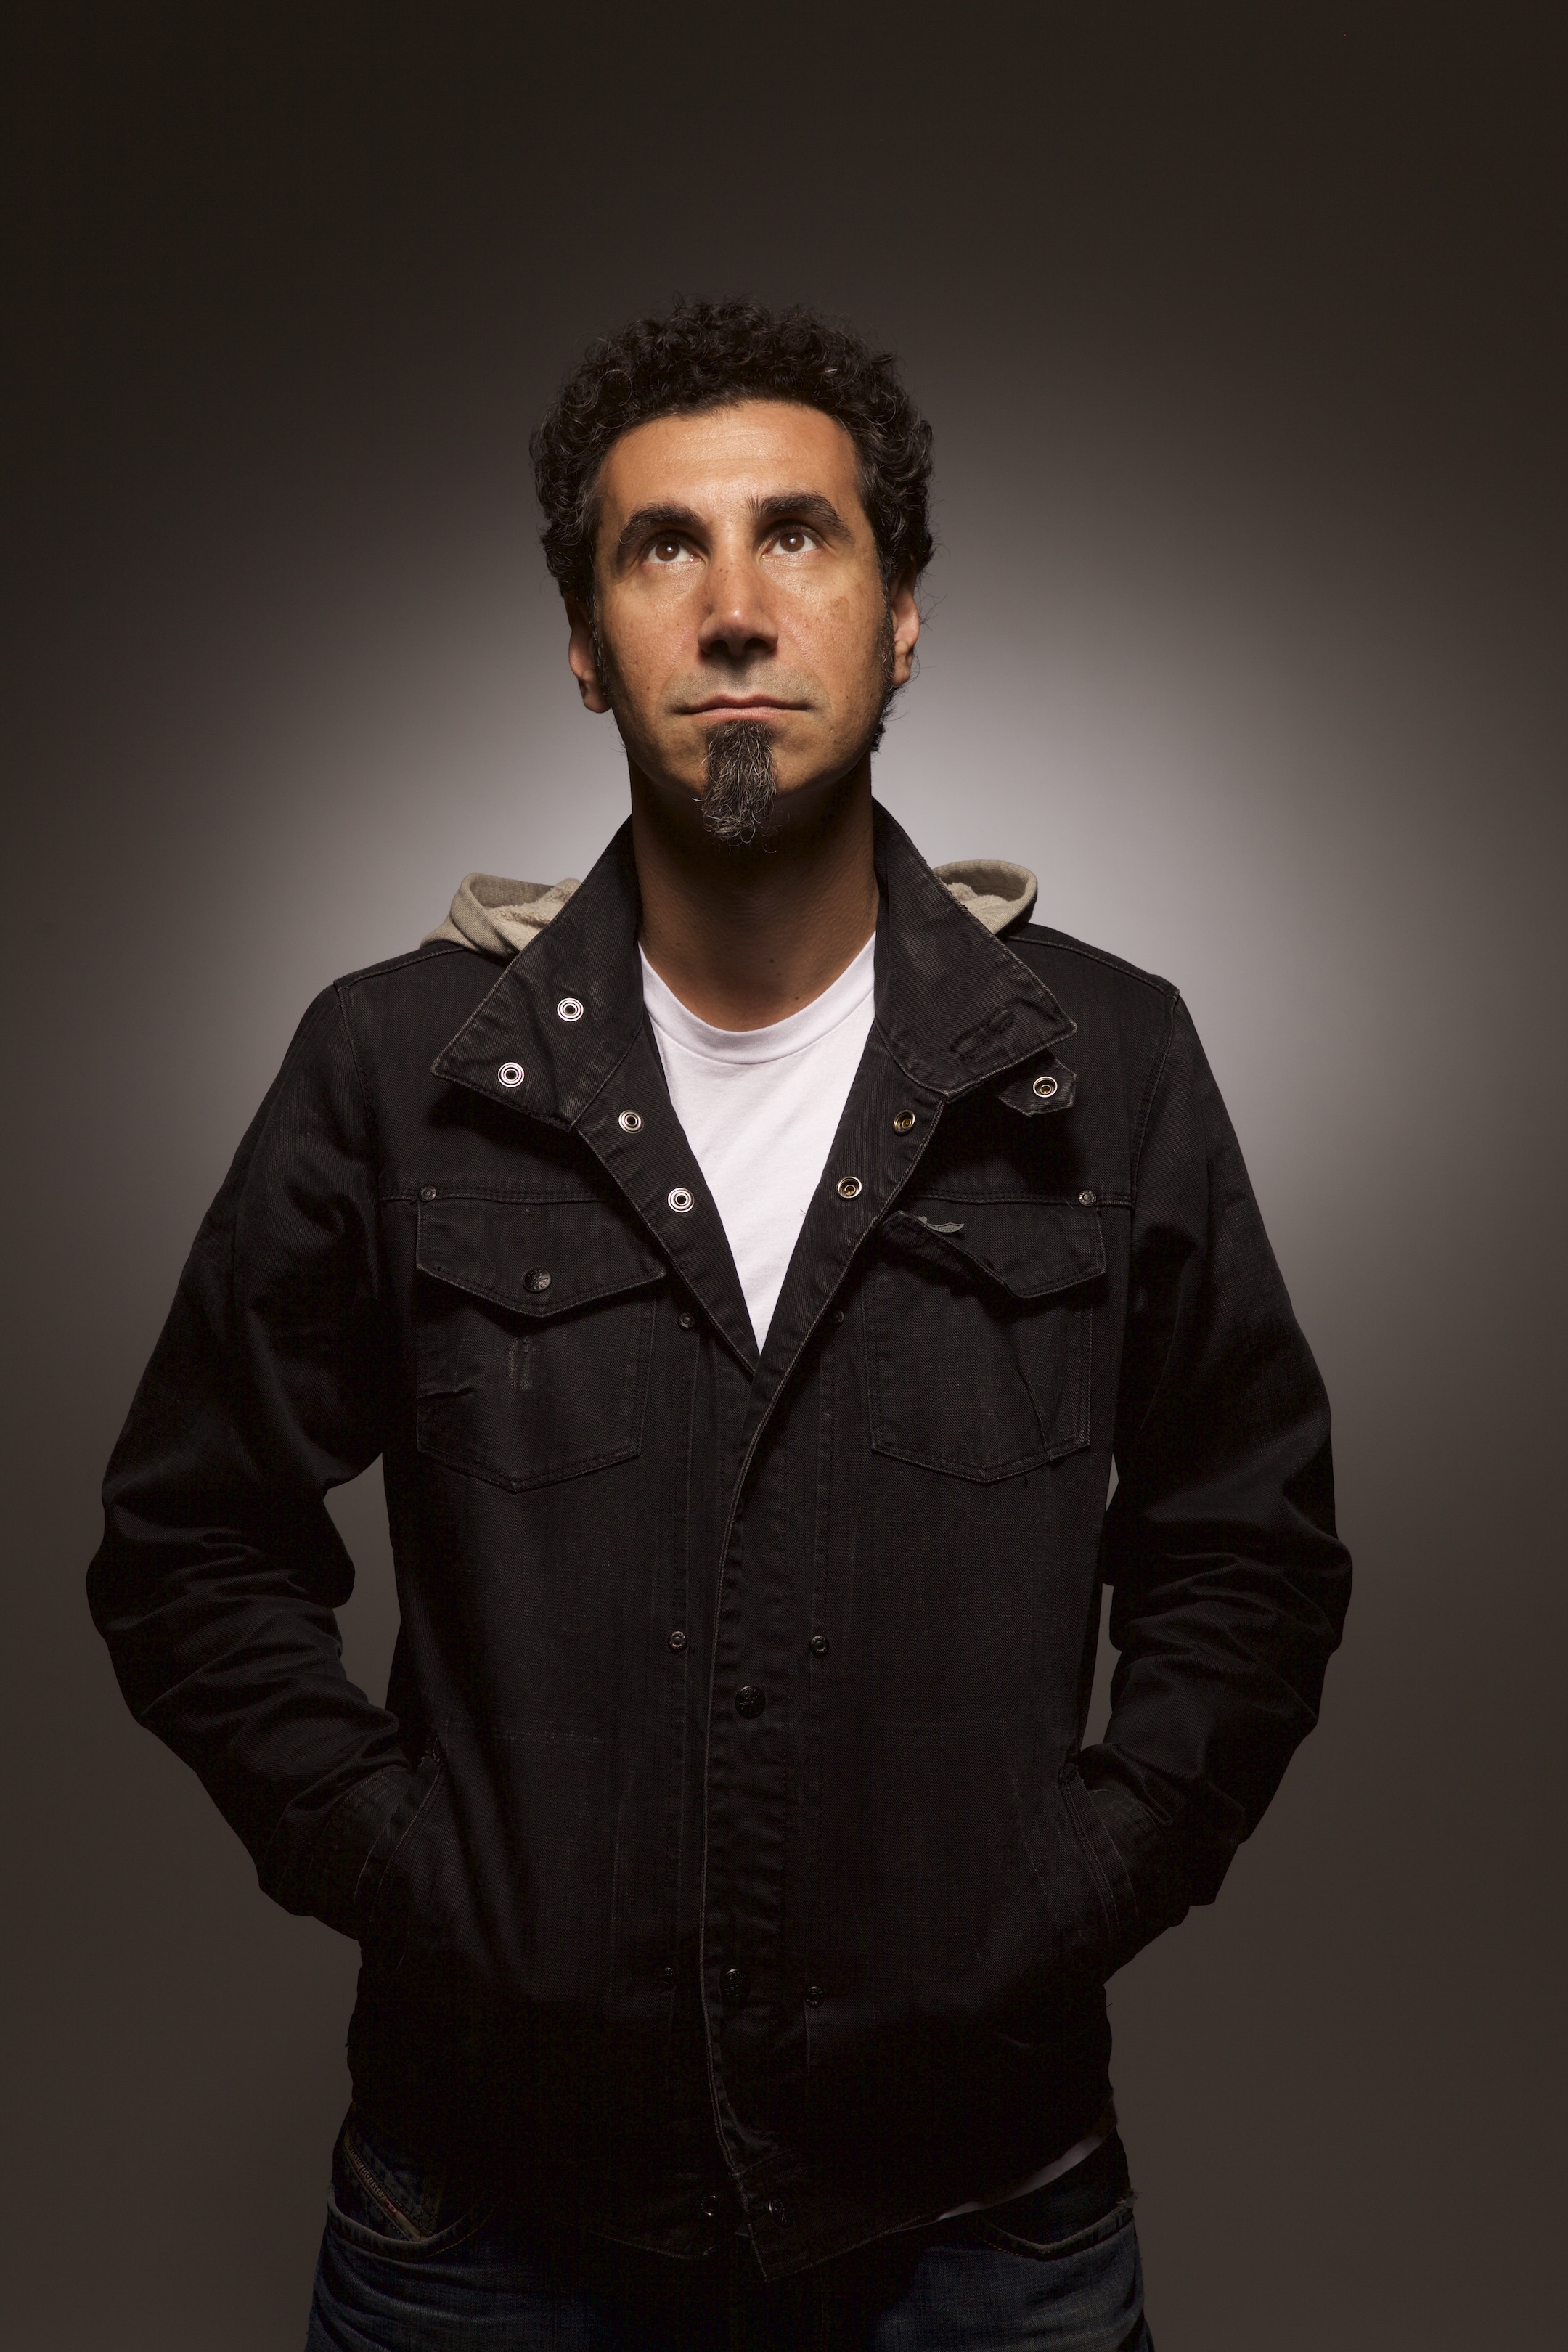 Charitybuzz Meet Serj Tankian At The Sold Out Elect Dead And